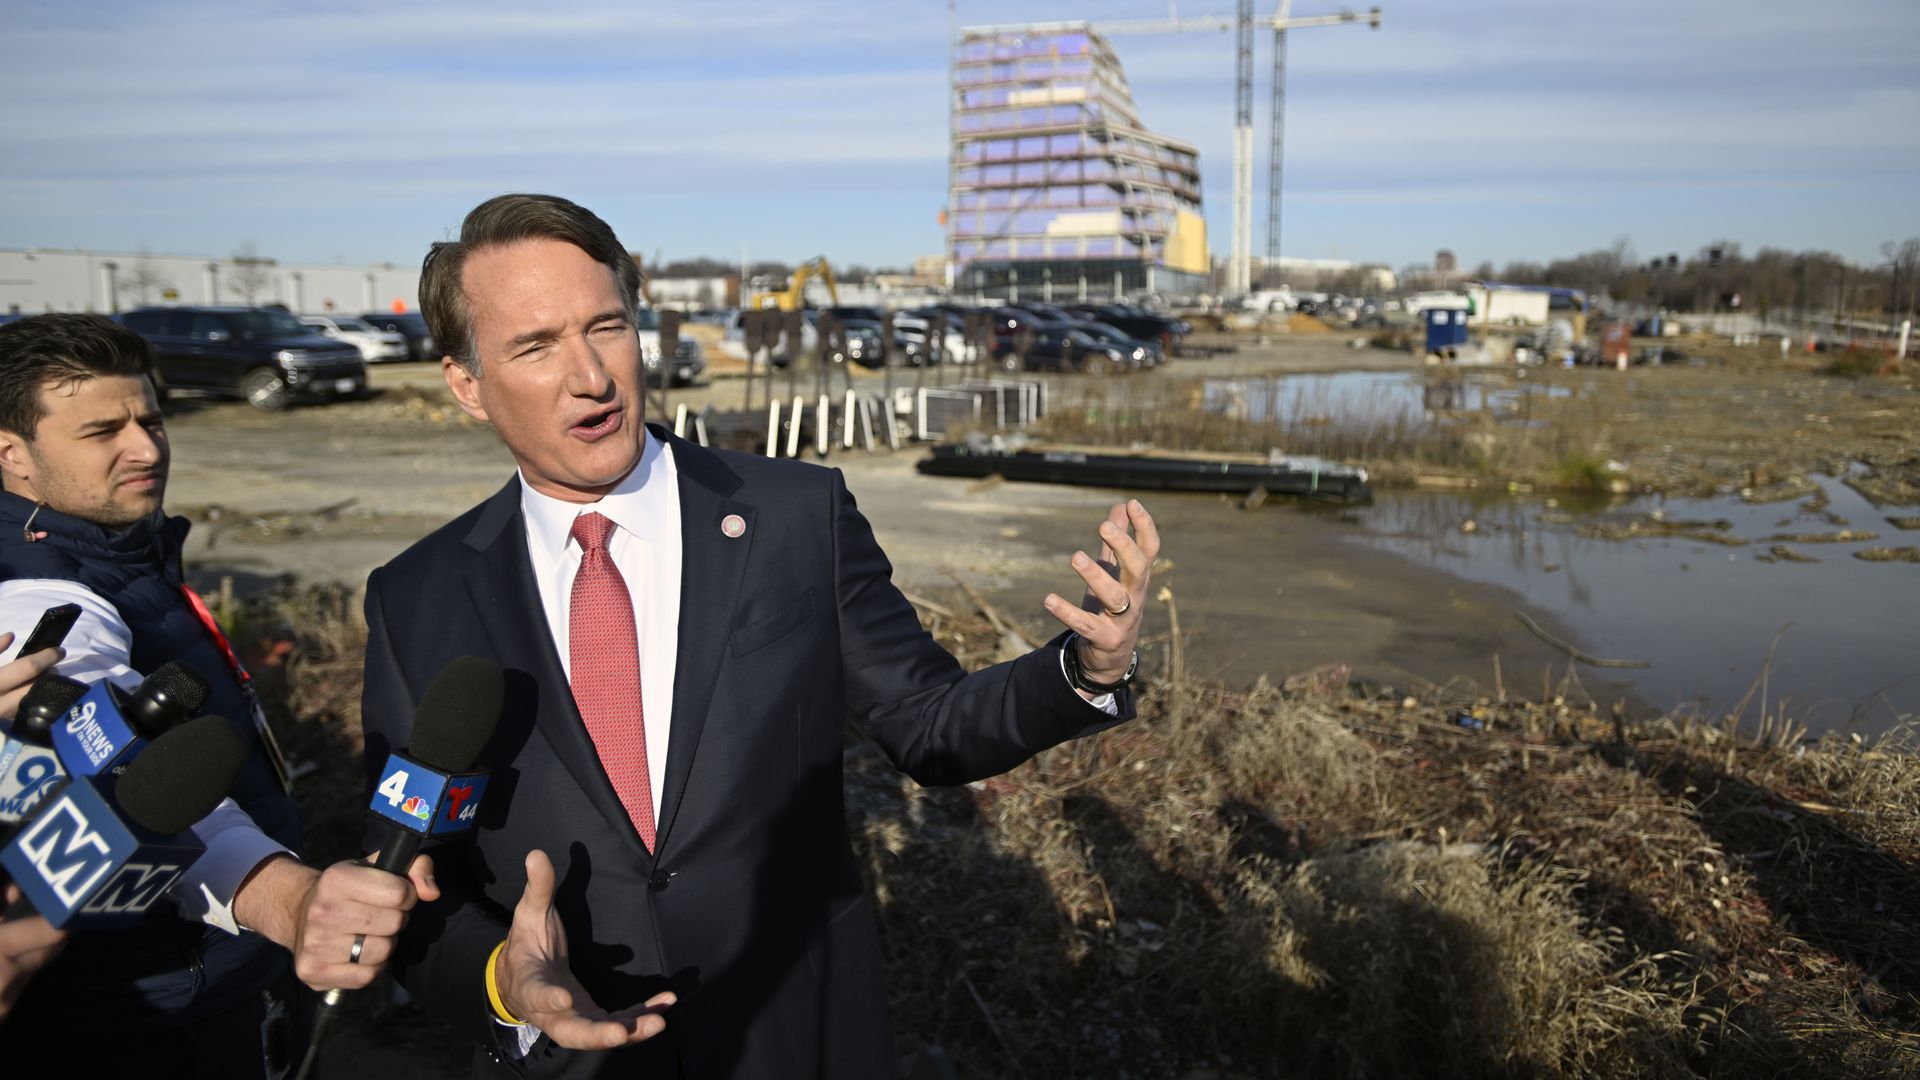 The Virginia governor stands in a suit and a tie in front of a construction site.